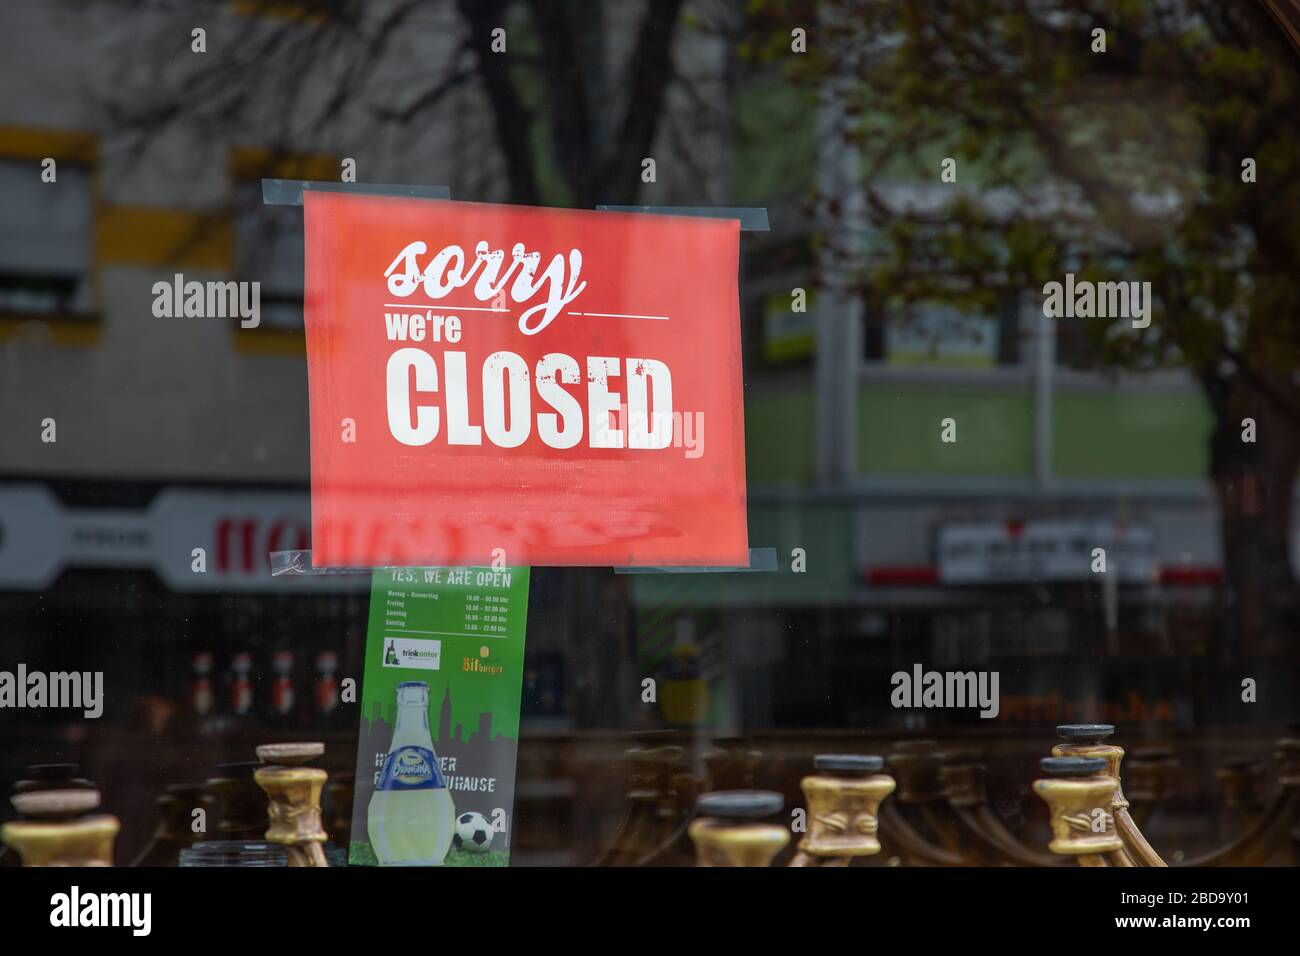 Neuwied, Germany - April 3, 2020: indicating label 'Sorry, we're closed' in the window of a closed pub based on Corona pandemic Stock Photo